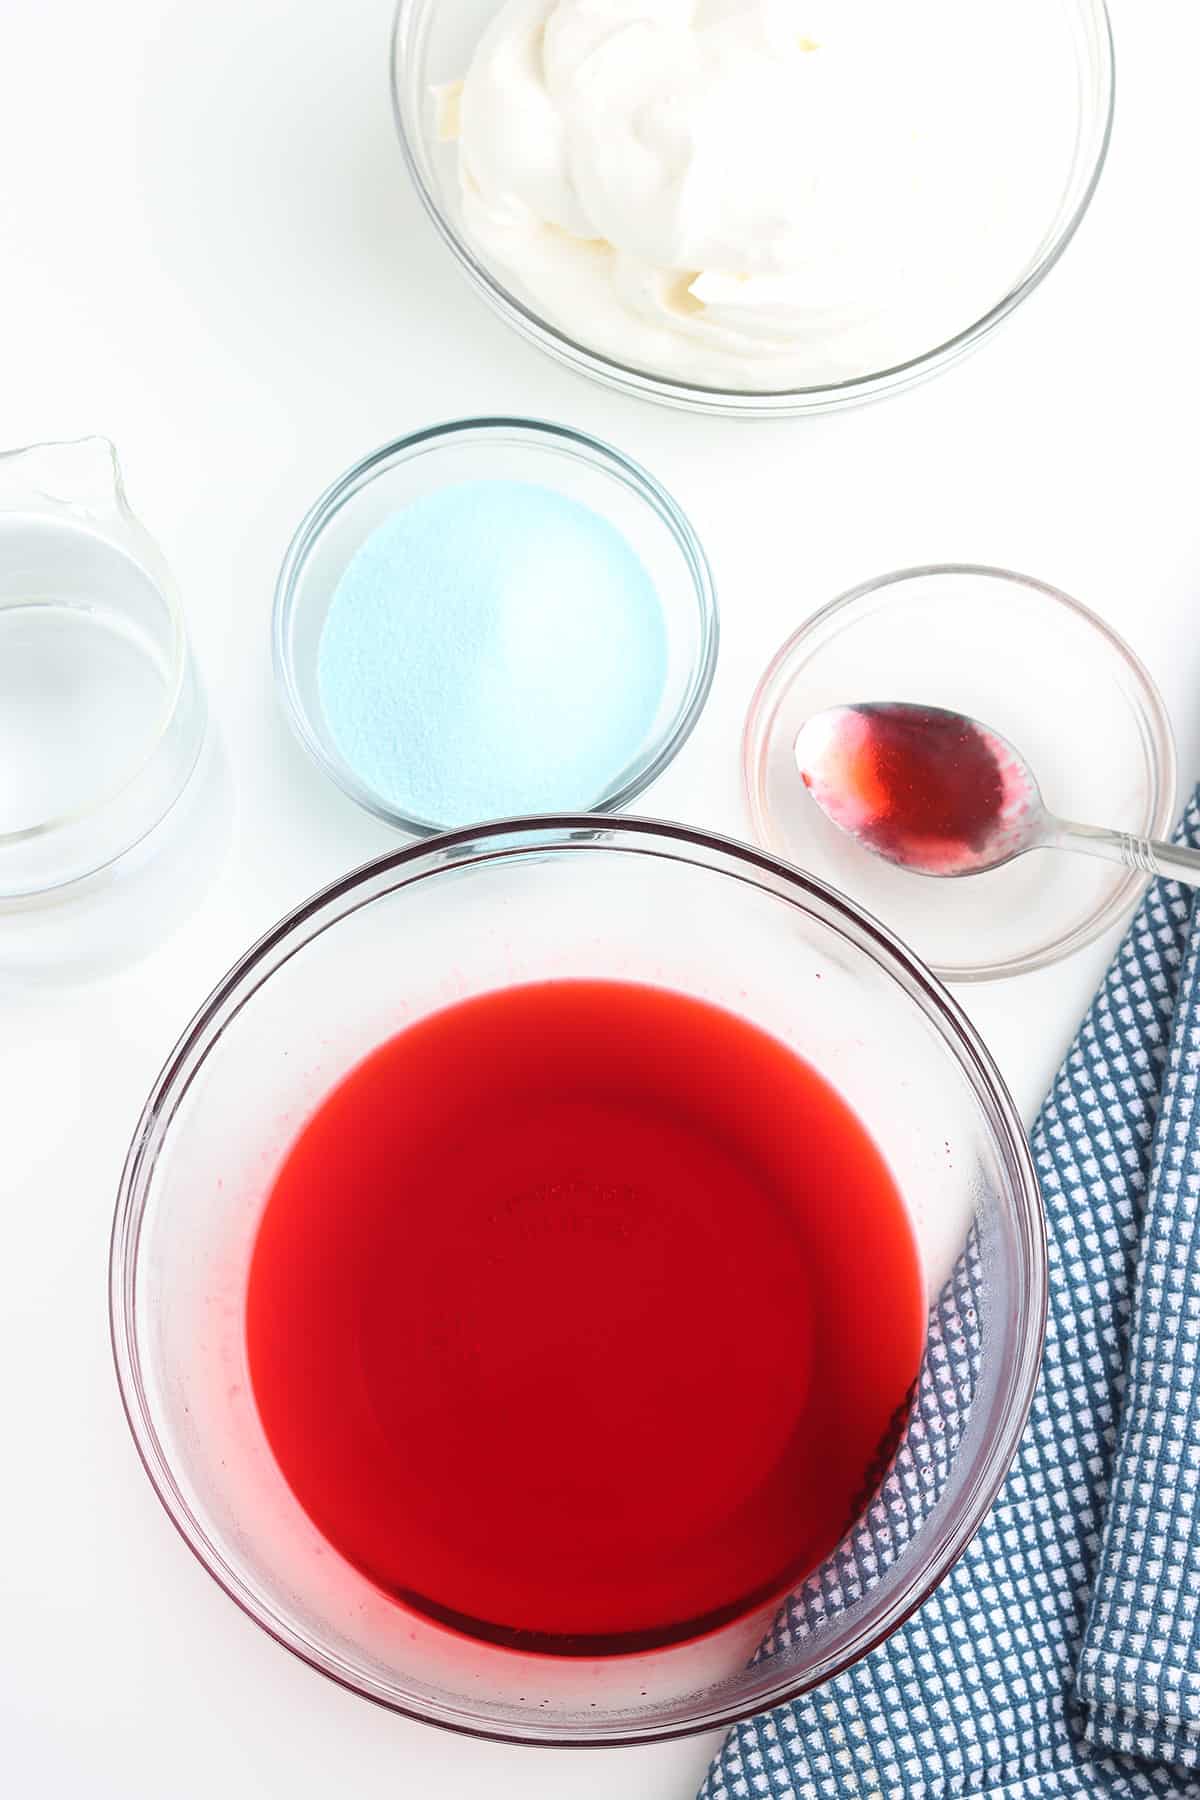 Dissolved red gelatin in a mixing bowl.